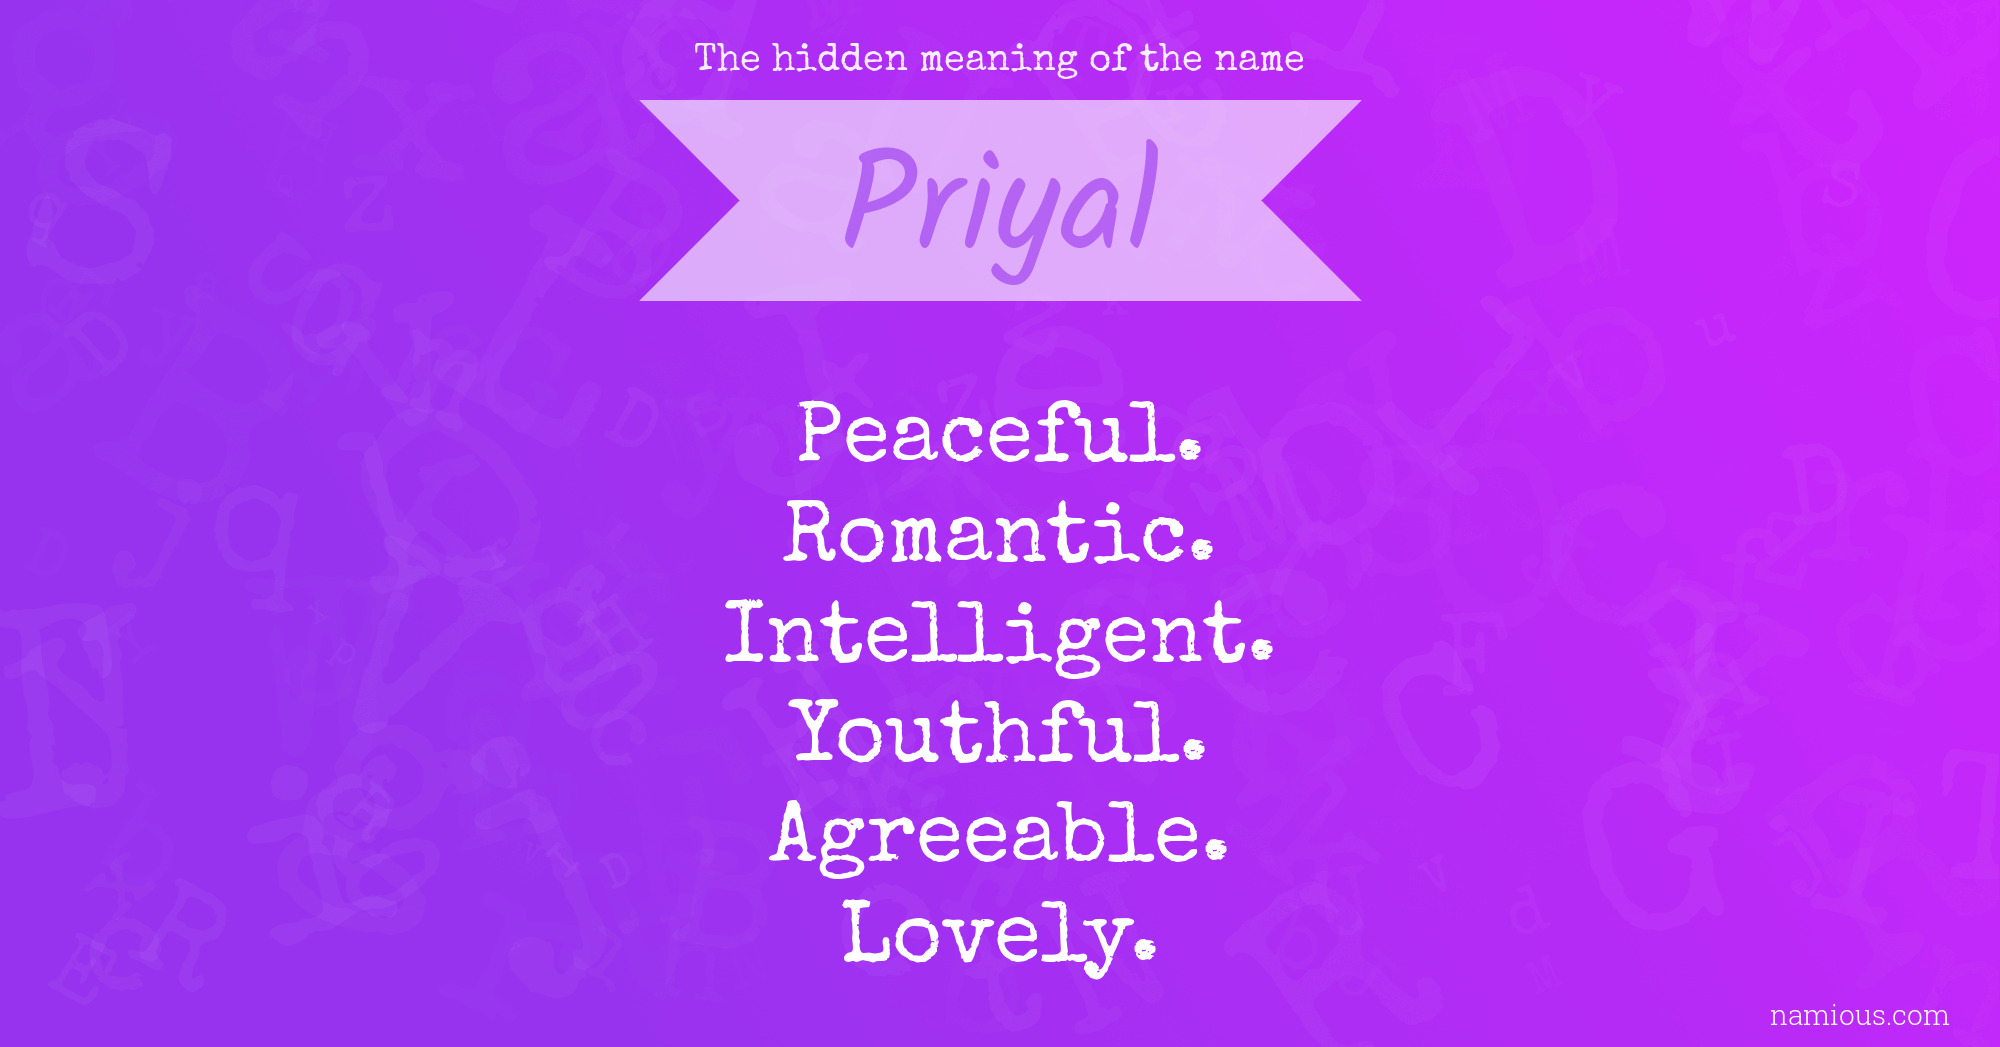 The hidden meaning of the name Priyal